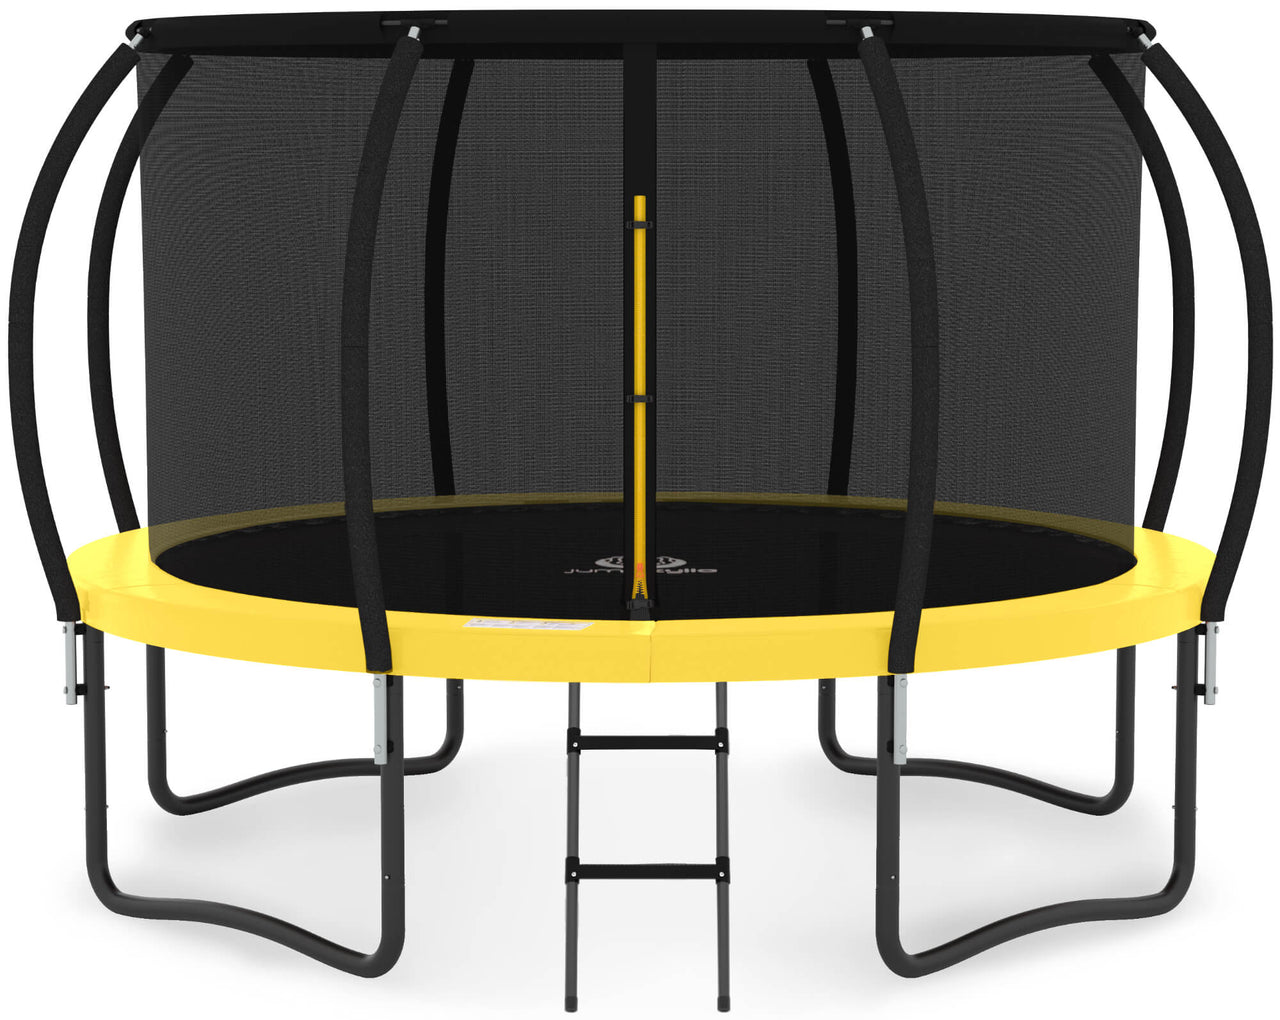 Jumpzylla 14FT Trampoline with Enclosure & Double Color Pad Cover